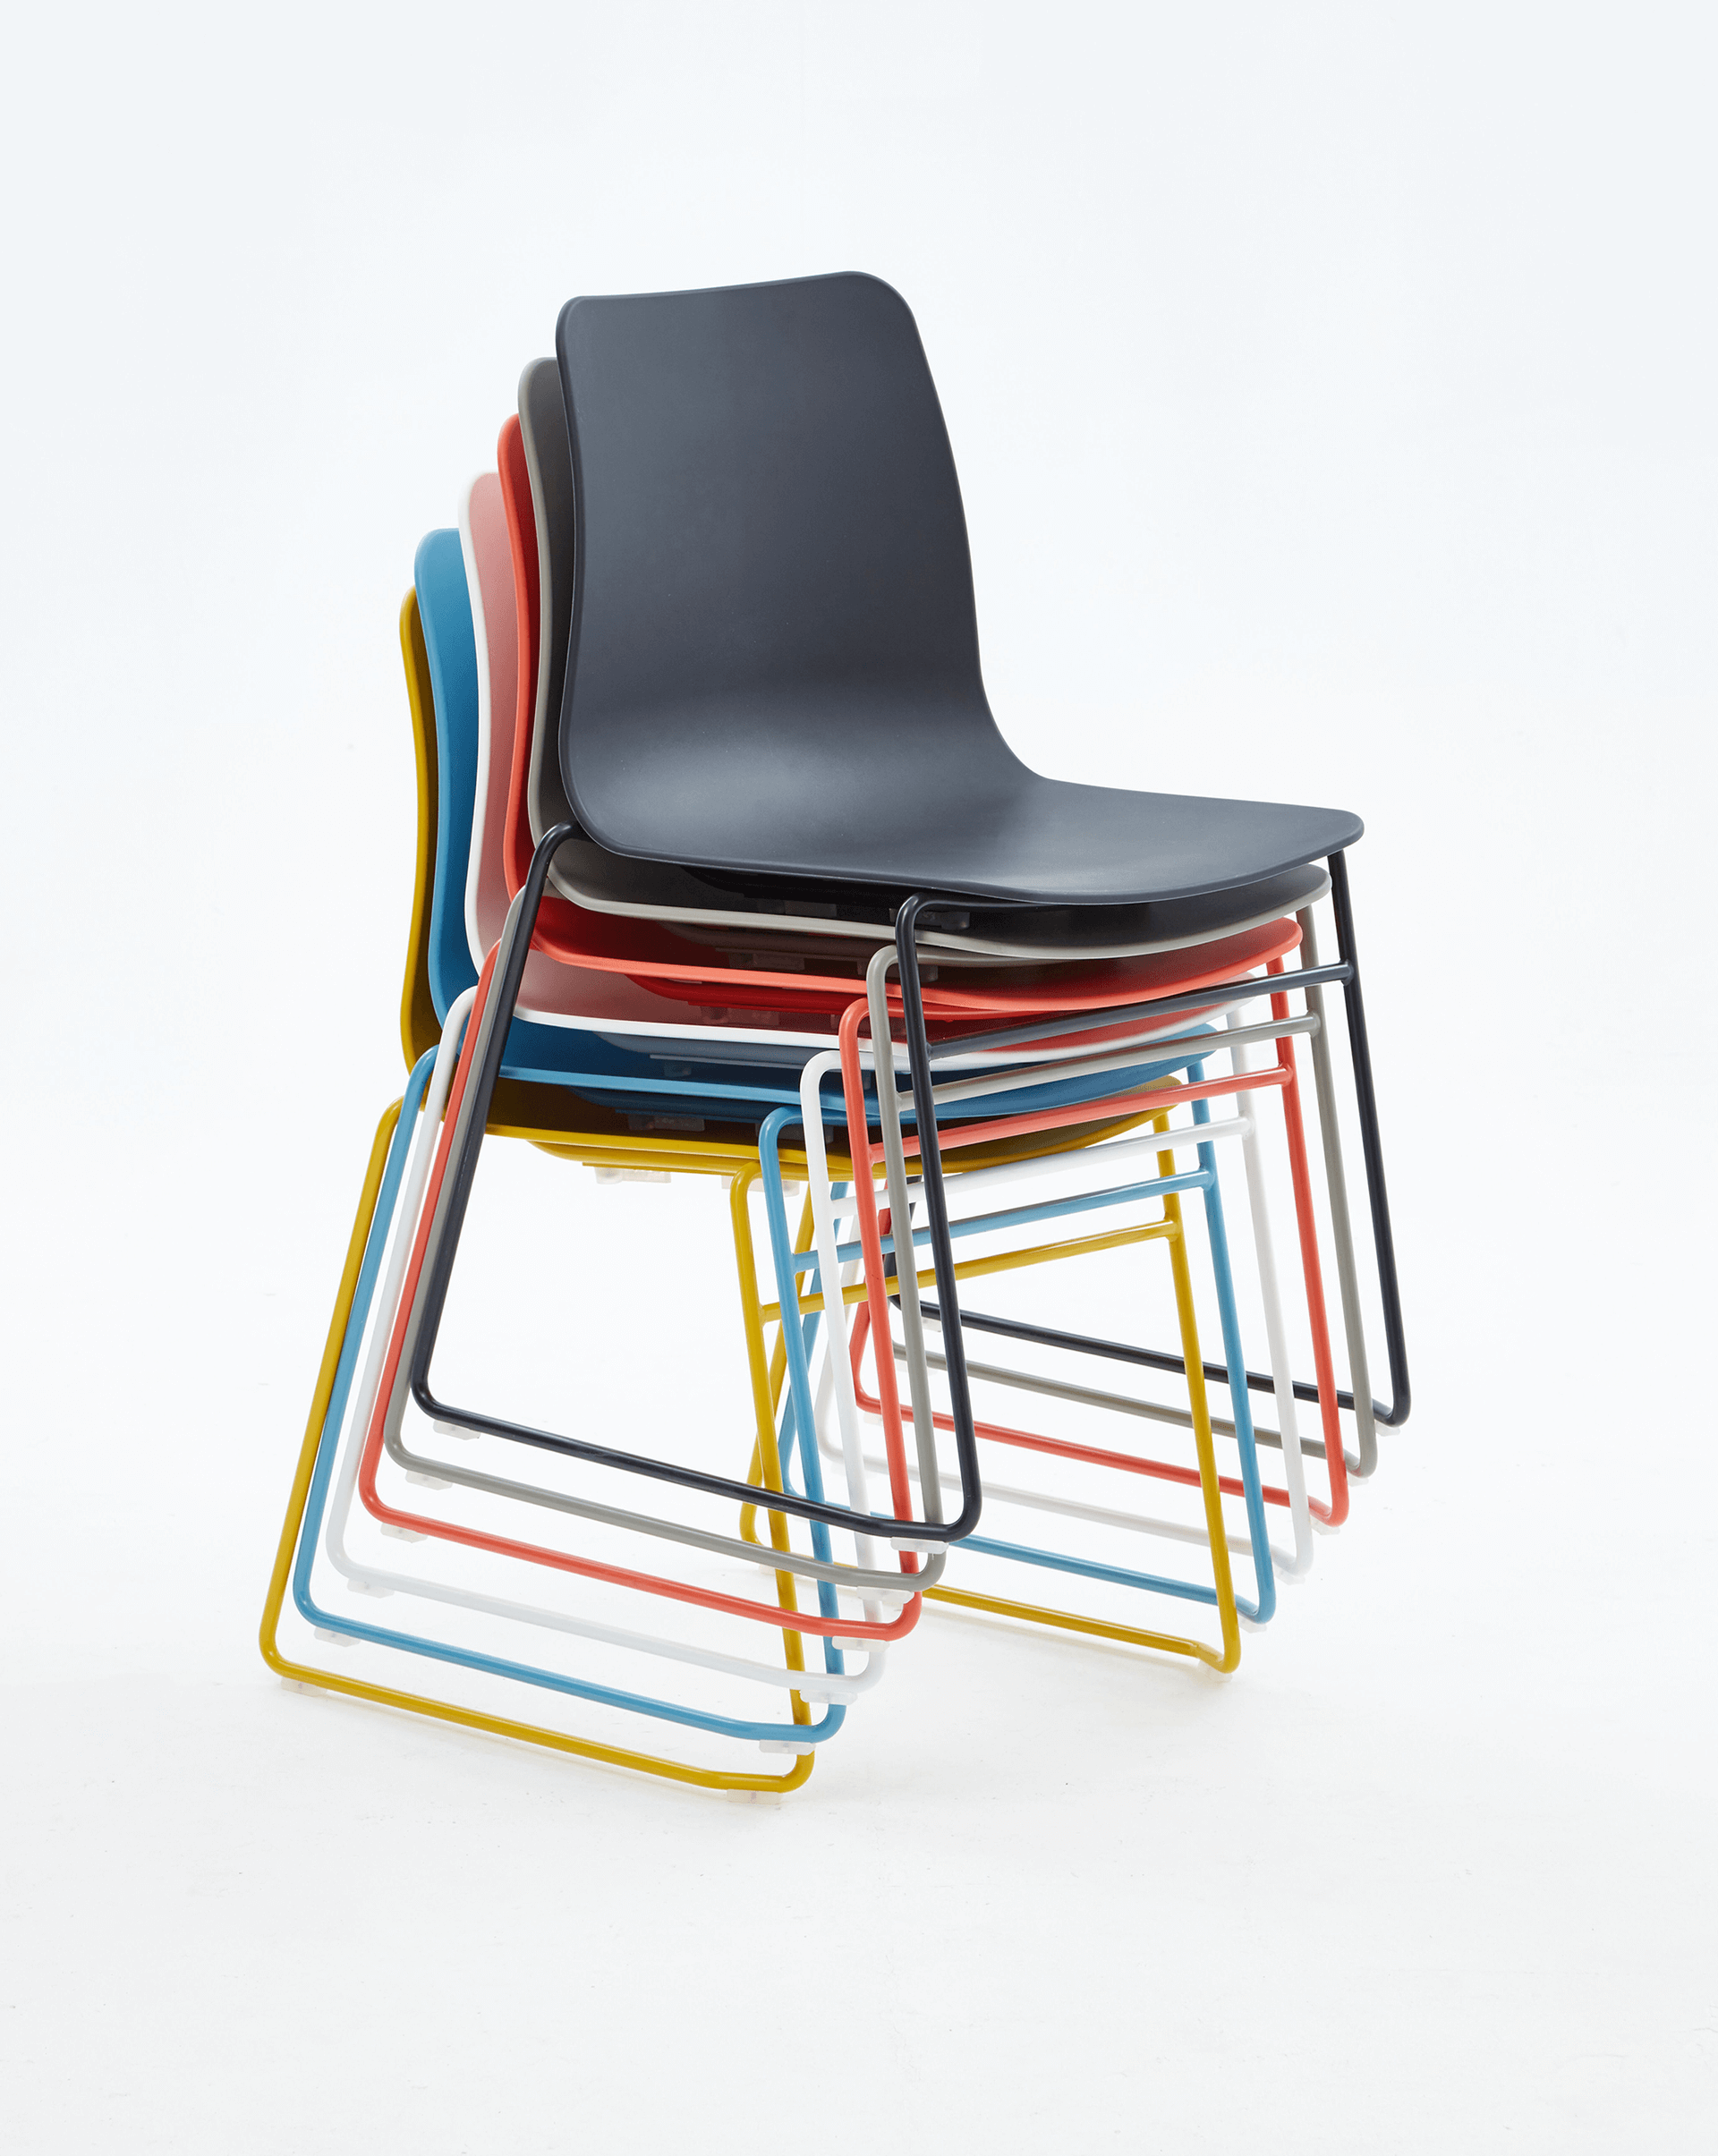 Polly stacking chair in a school